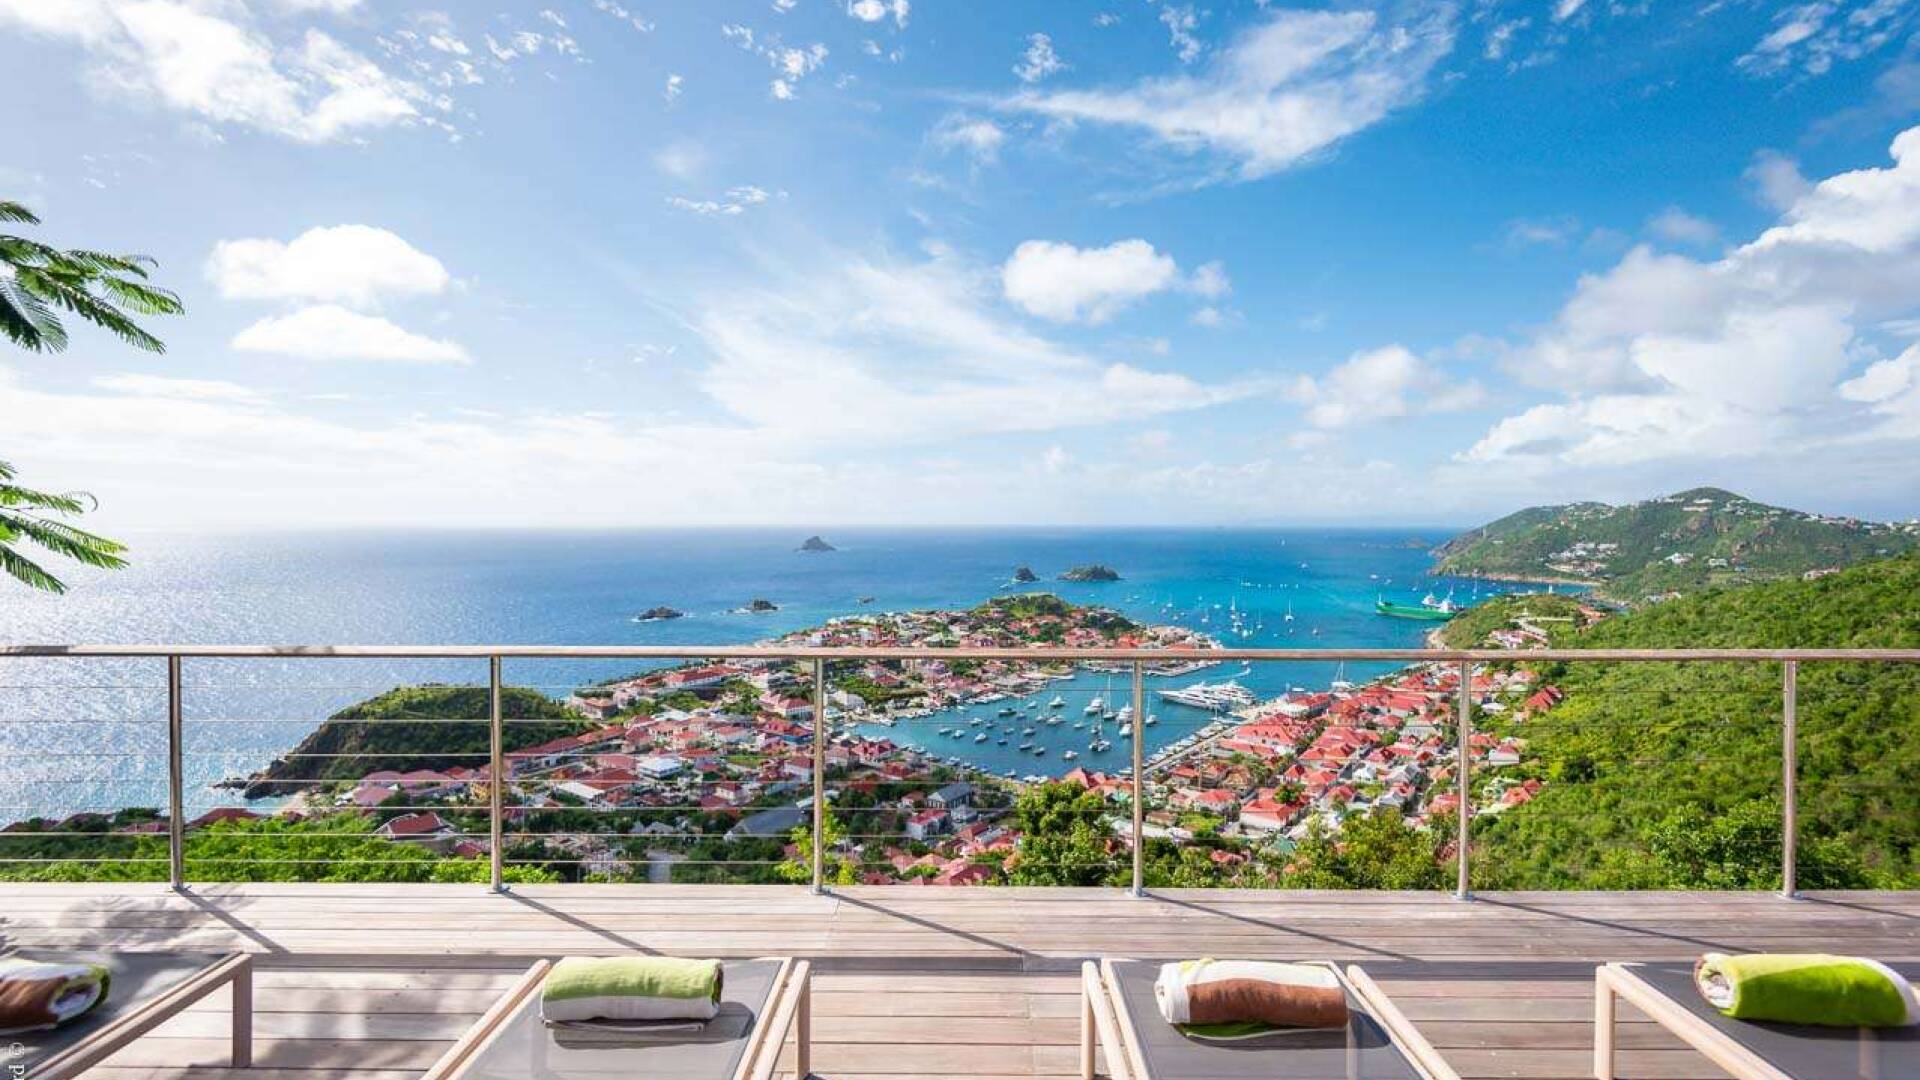 The view from WV MOU, Lurin, St. Barthelemy